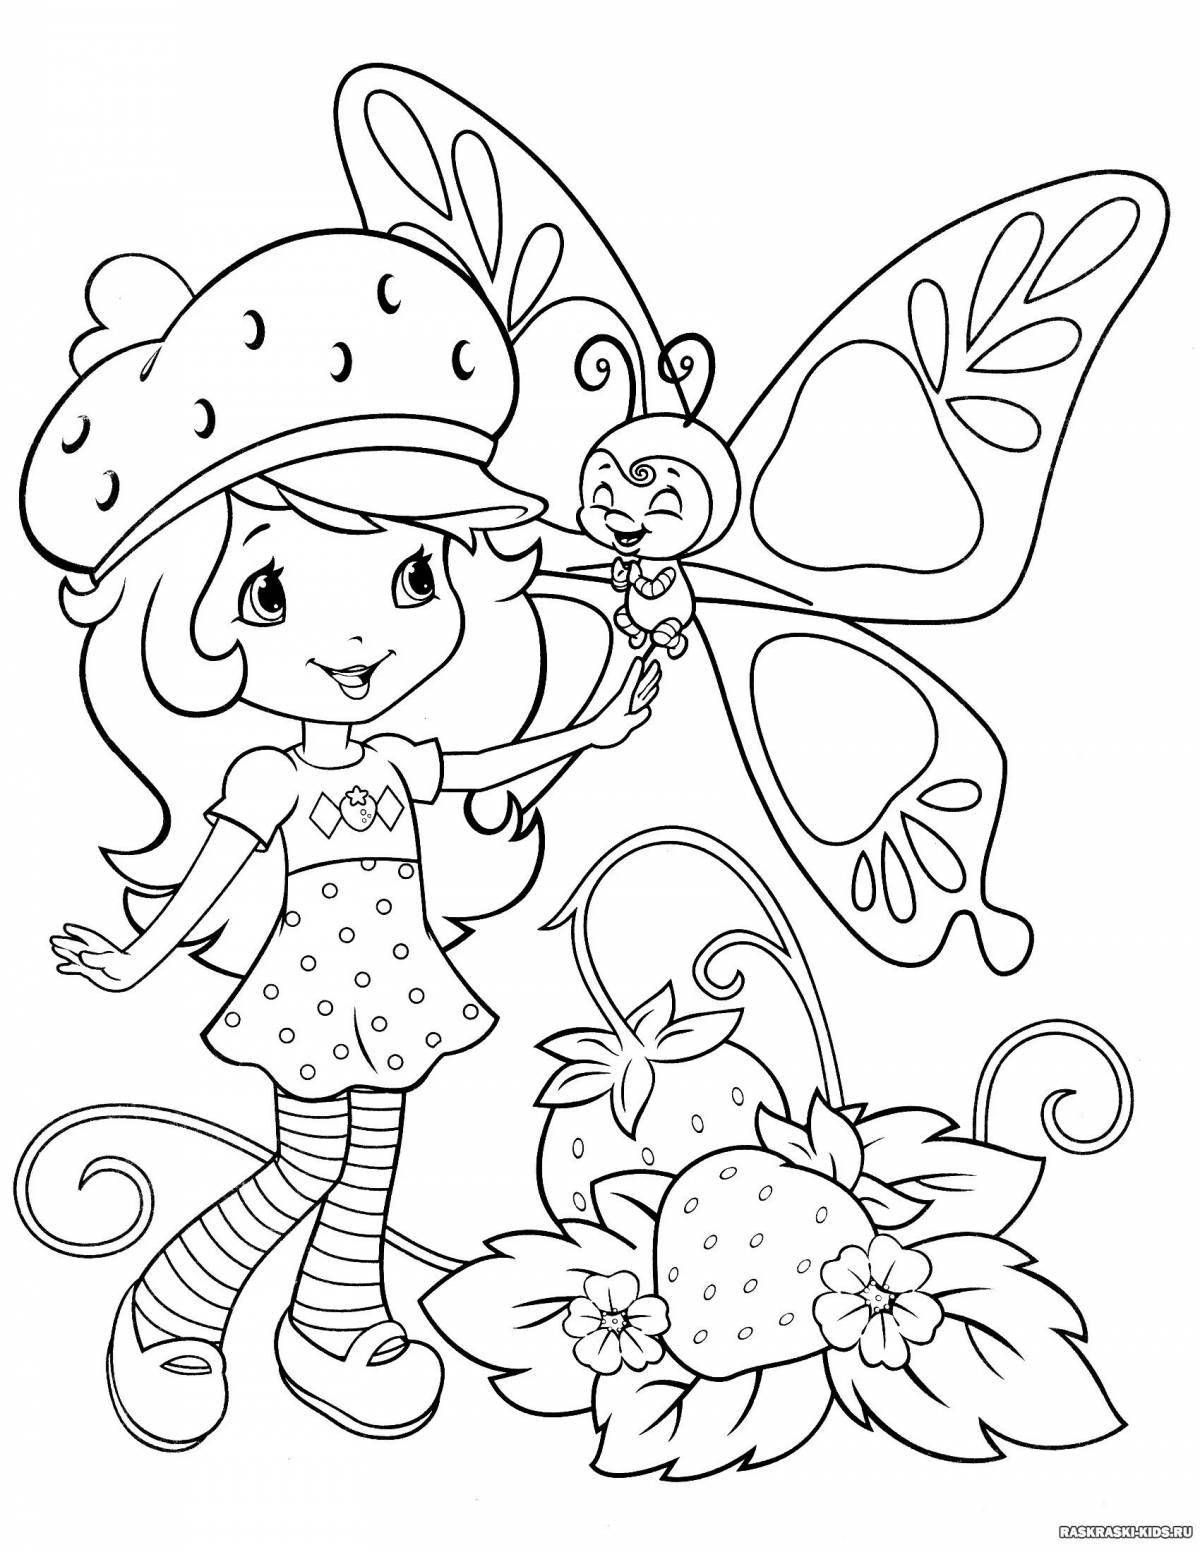 Exciting coloring book for girls 5-6 years old with print